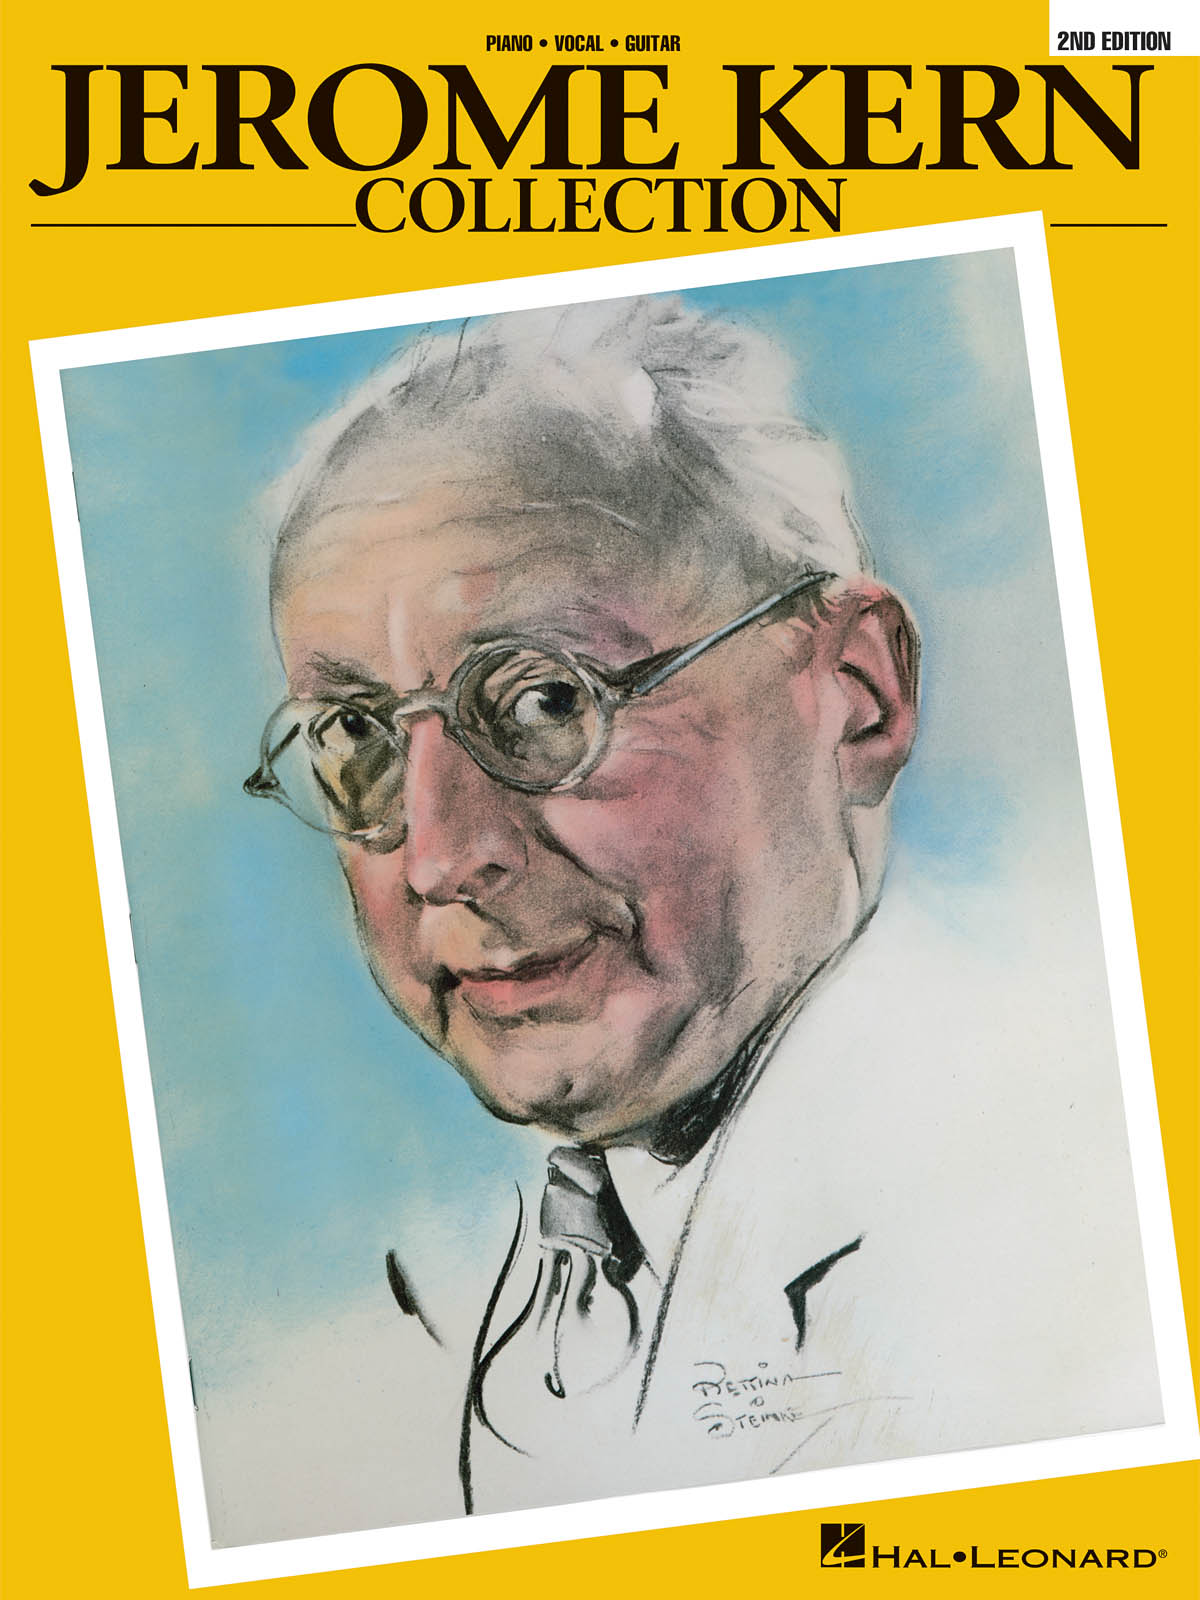 Jerome Kern: Jerome Kern Collection - 2nd Edition: Piano  Vocal and Guitar: